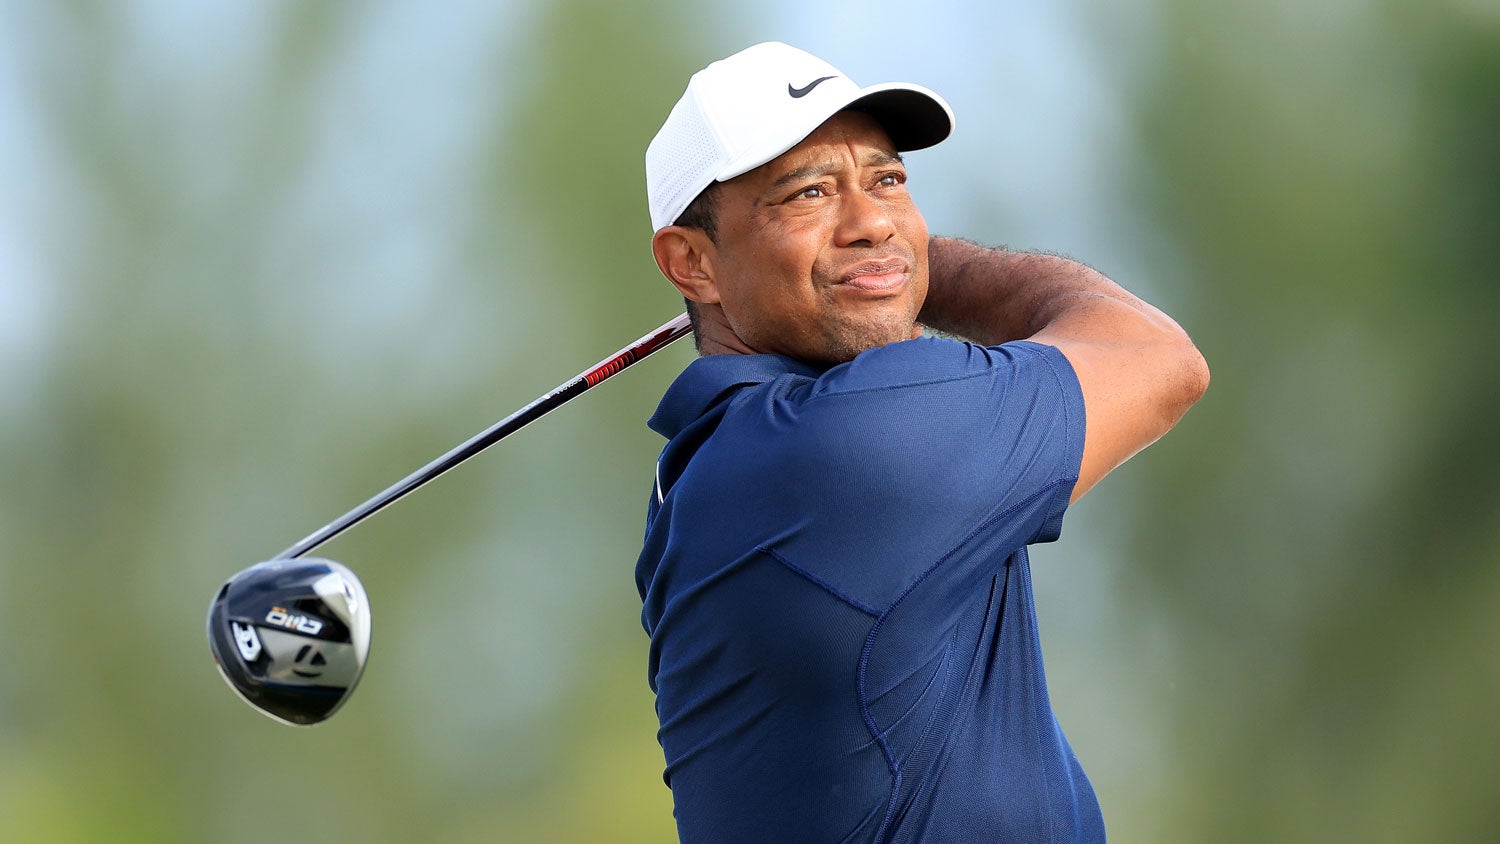 Tiger Woods plays a shot during the pro-am as a preview for the Hero World Challenge